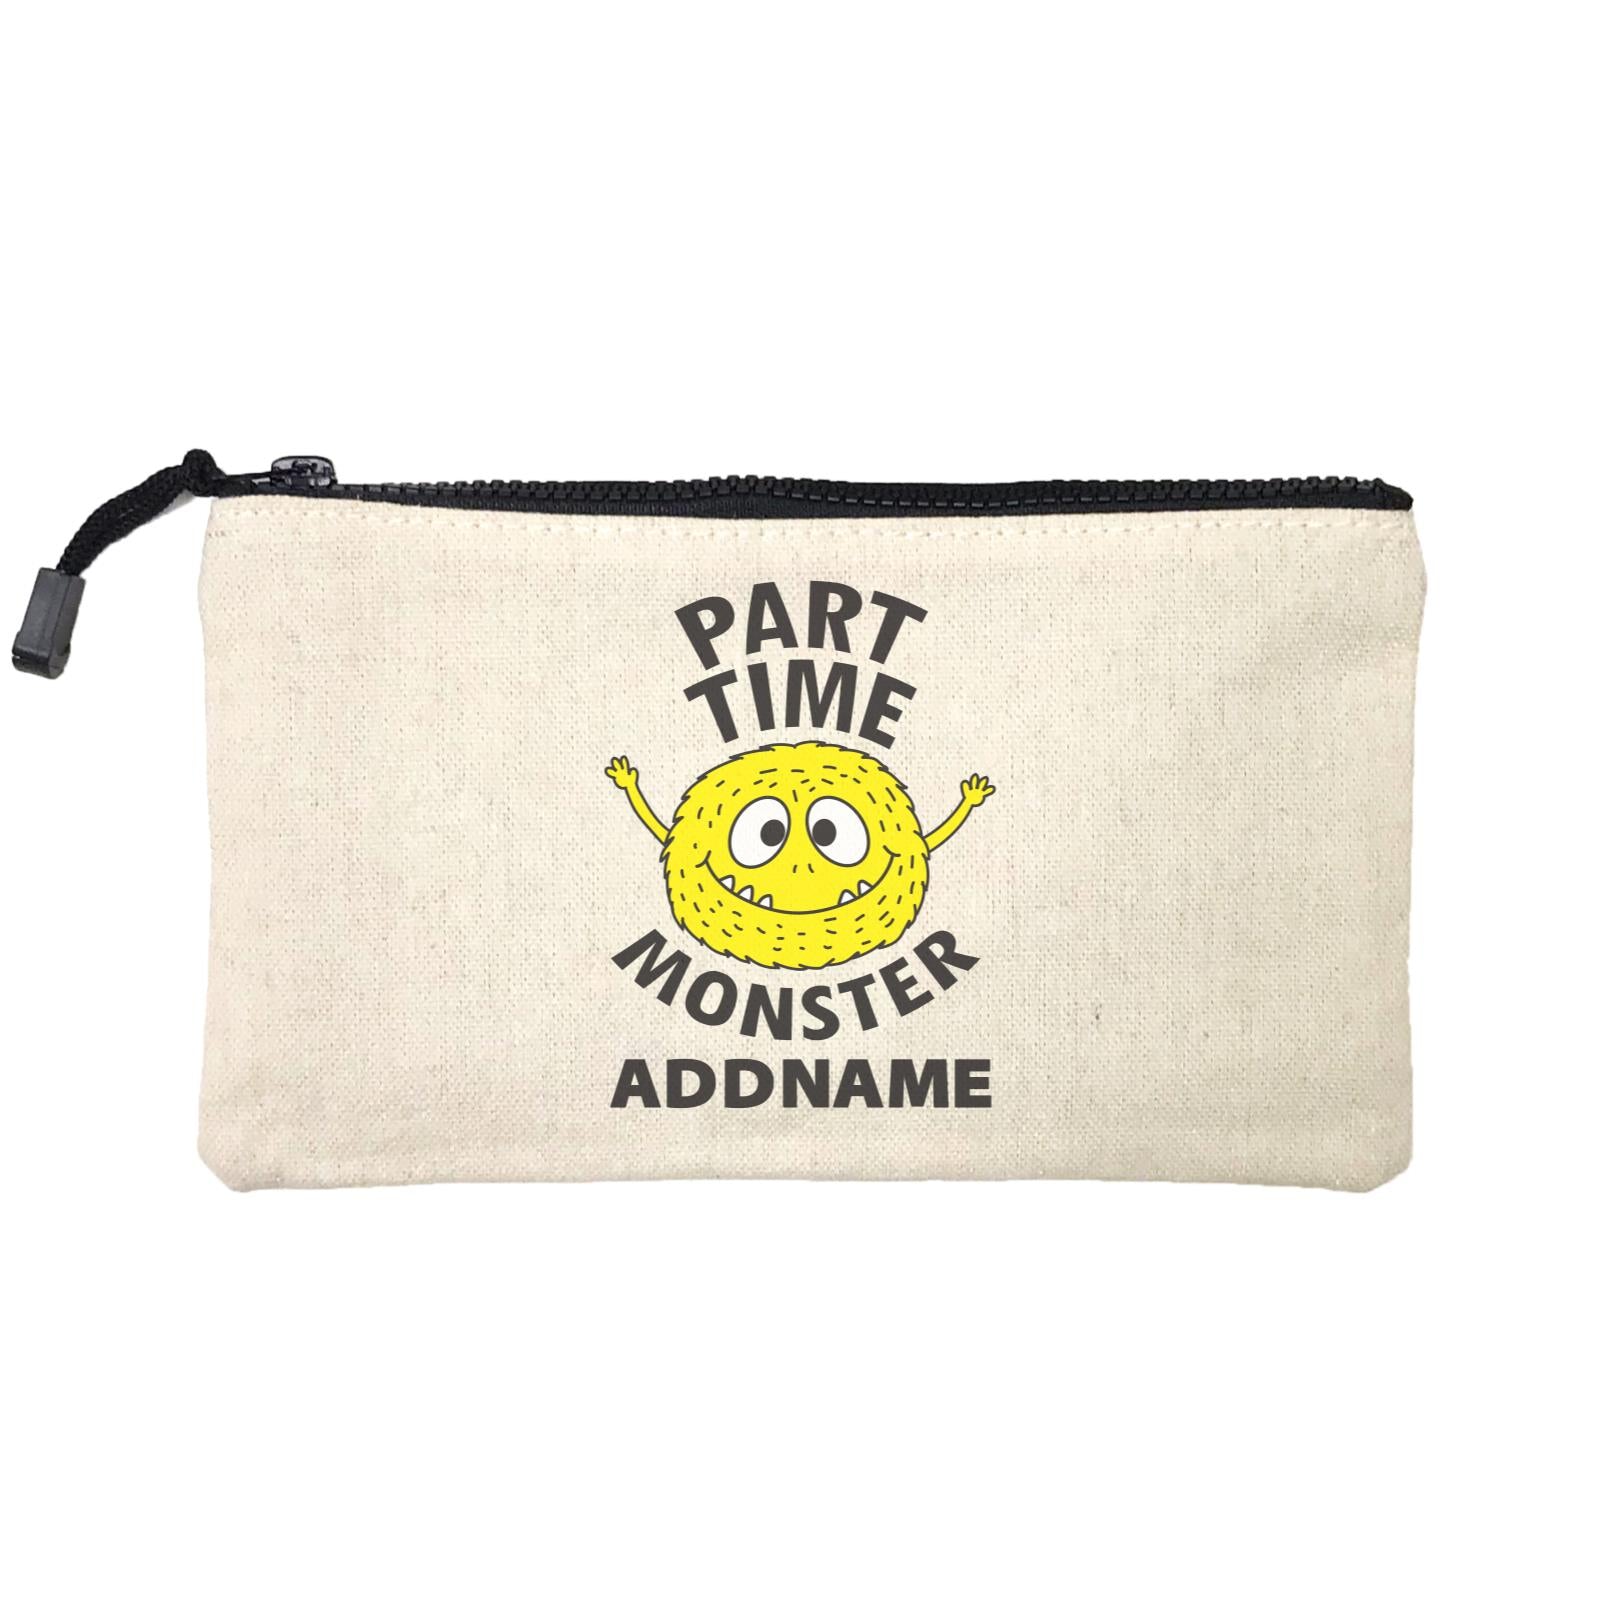 Cool Cute Monster Part Time Monster Addname Mini Accessories Stationery Pouch